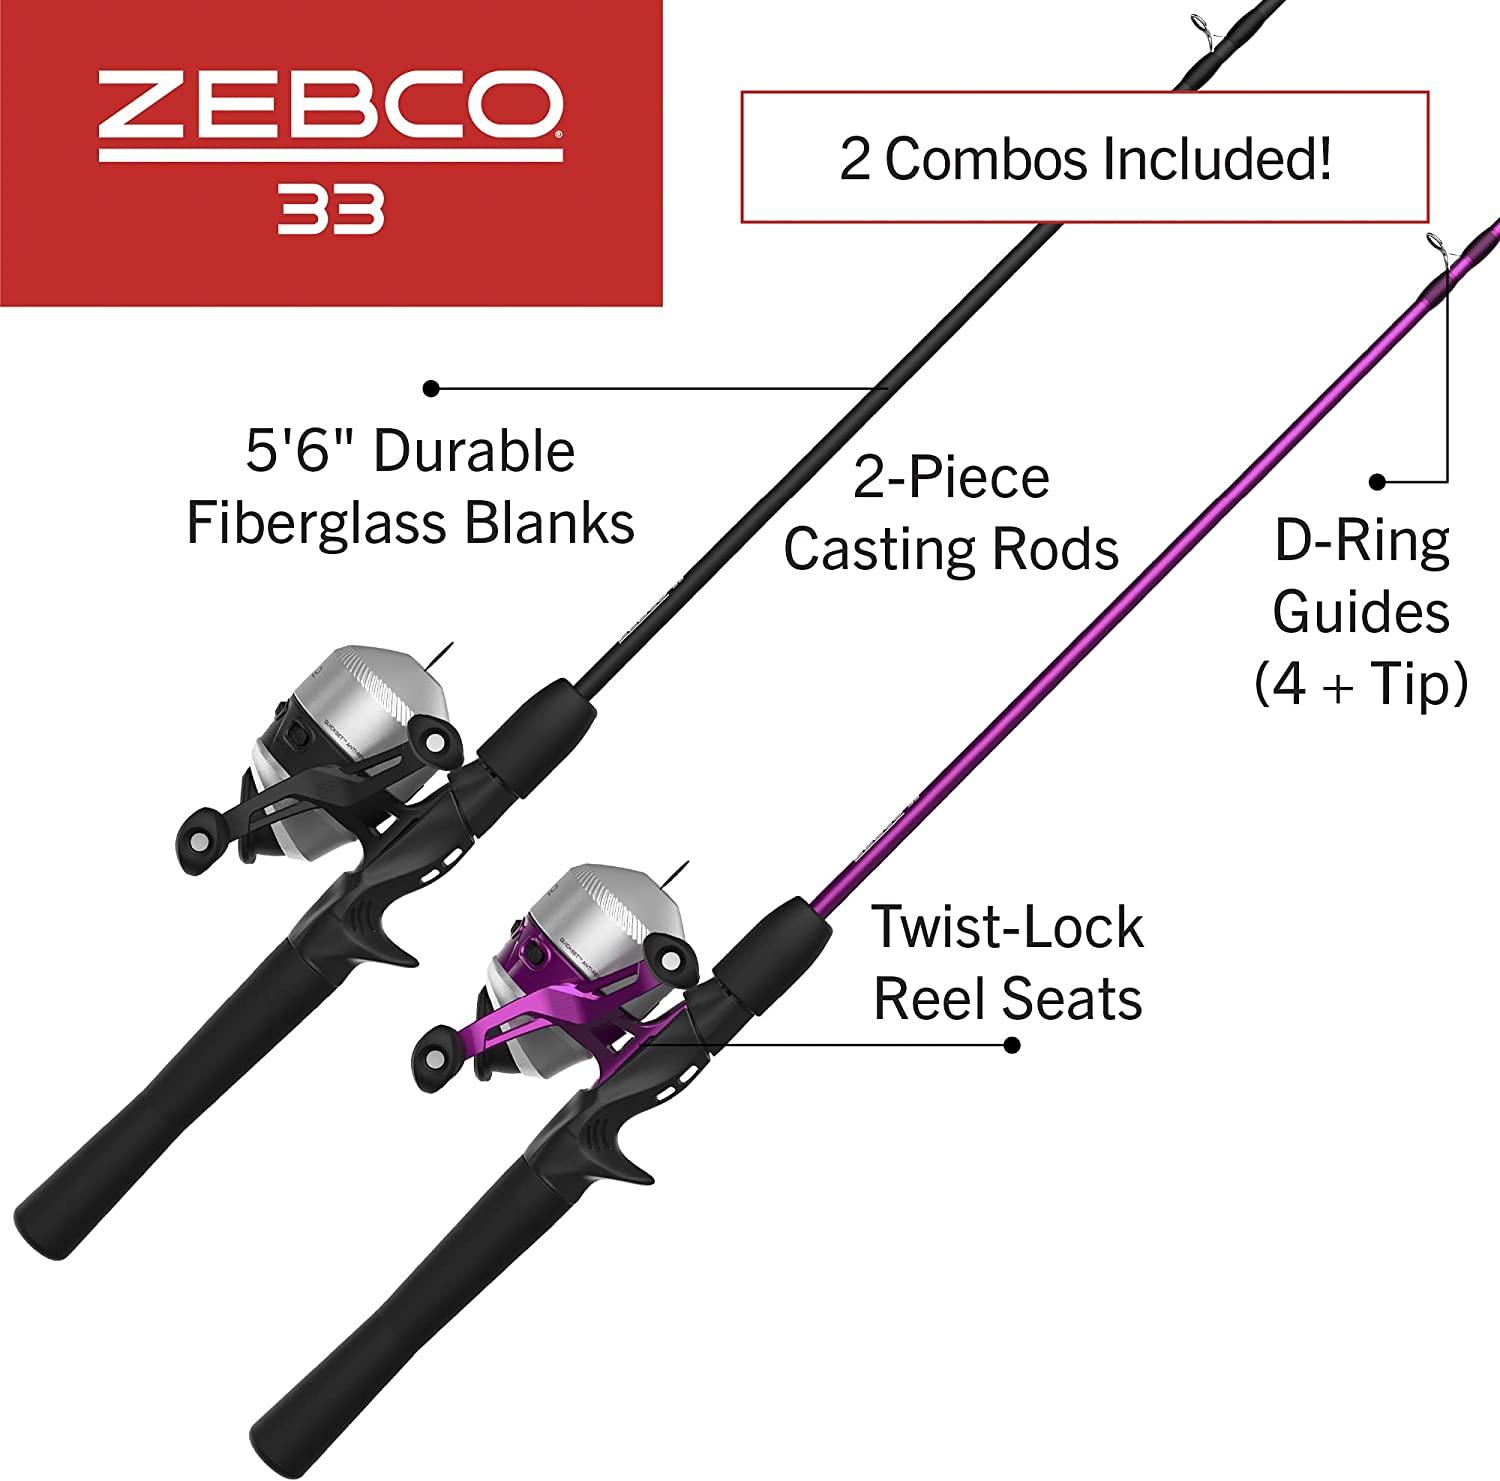 Zebco Ready Tackle Spinning Reel and Fishing Rod Combo, 5-Foot 6-Inch  Fishing Pole, Size 20 Reel, Left-Hand Retrieve, Pre-Spooled with 8-Pound  Zebco